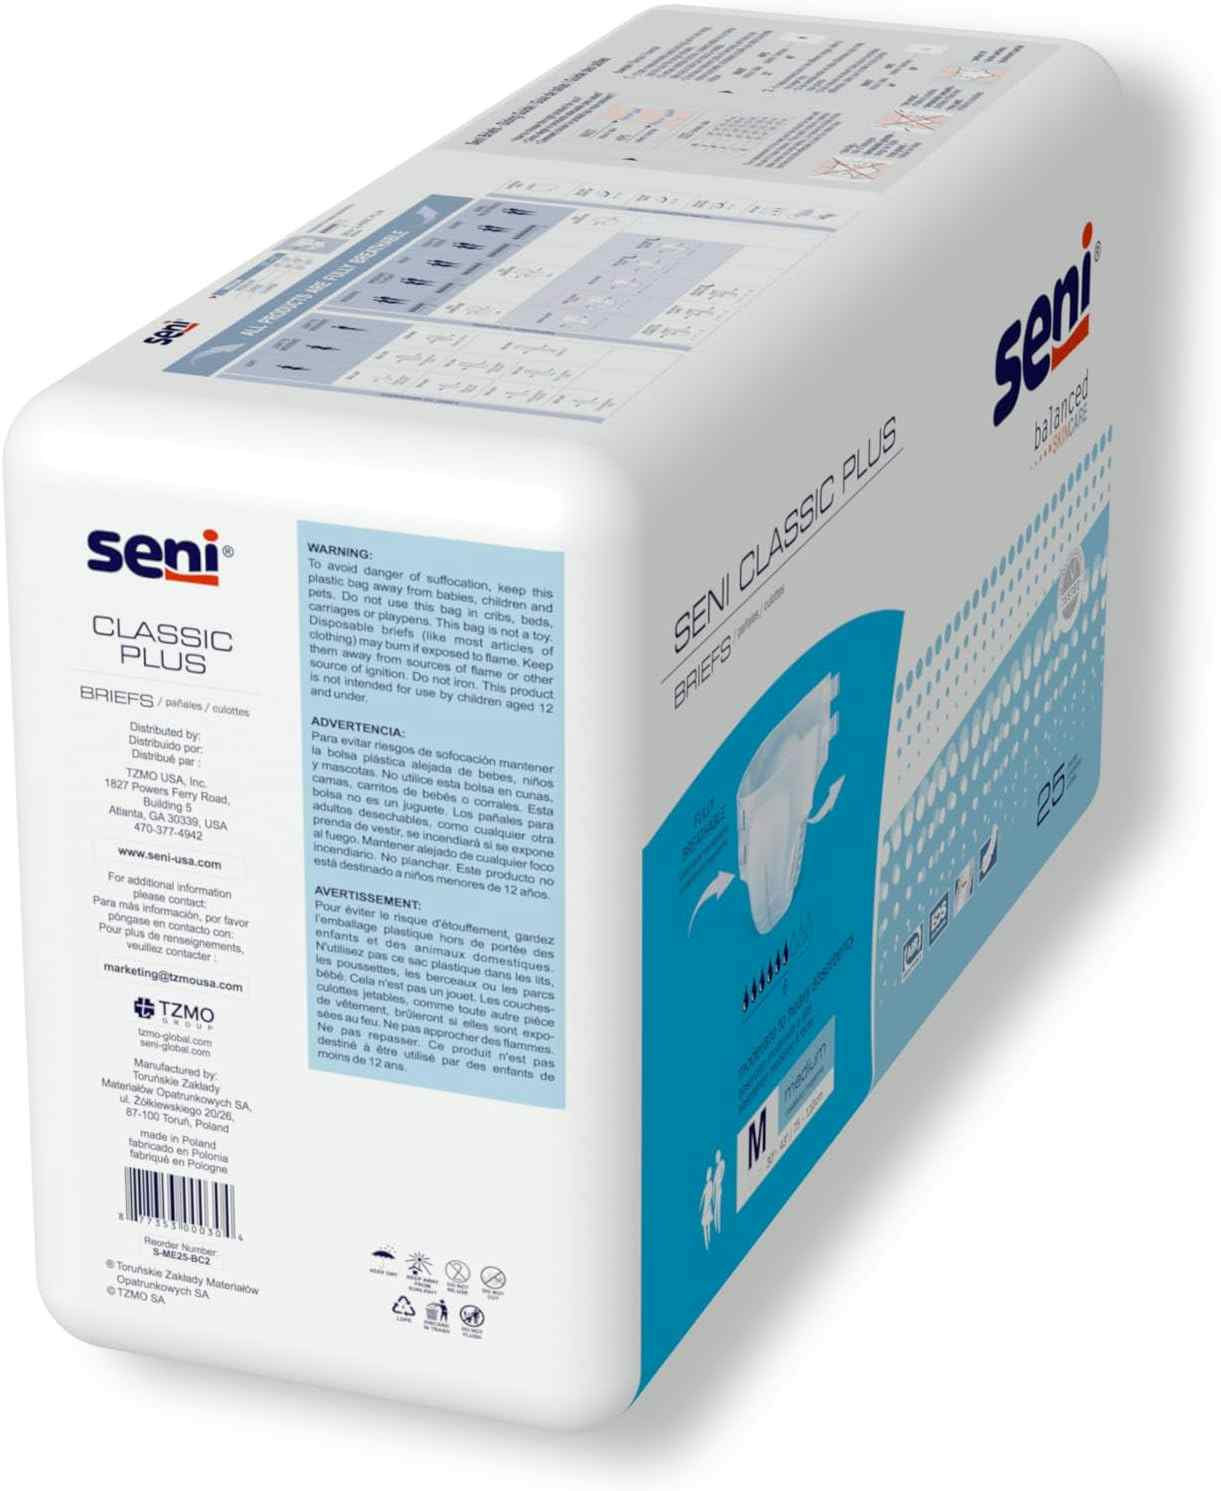 Seni Classic Plus Brief Adult Diapers with Tabs, Moderate Absorbency